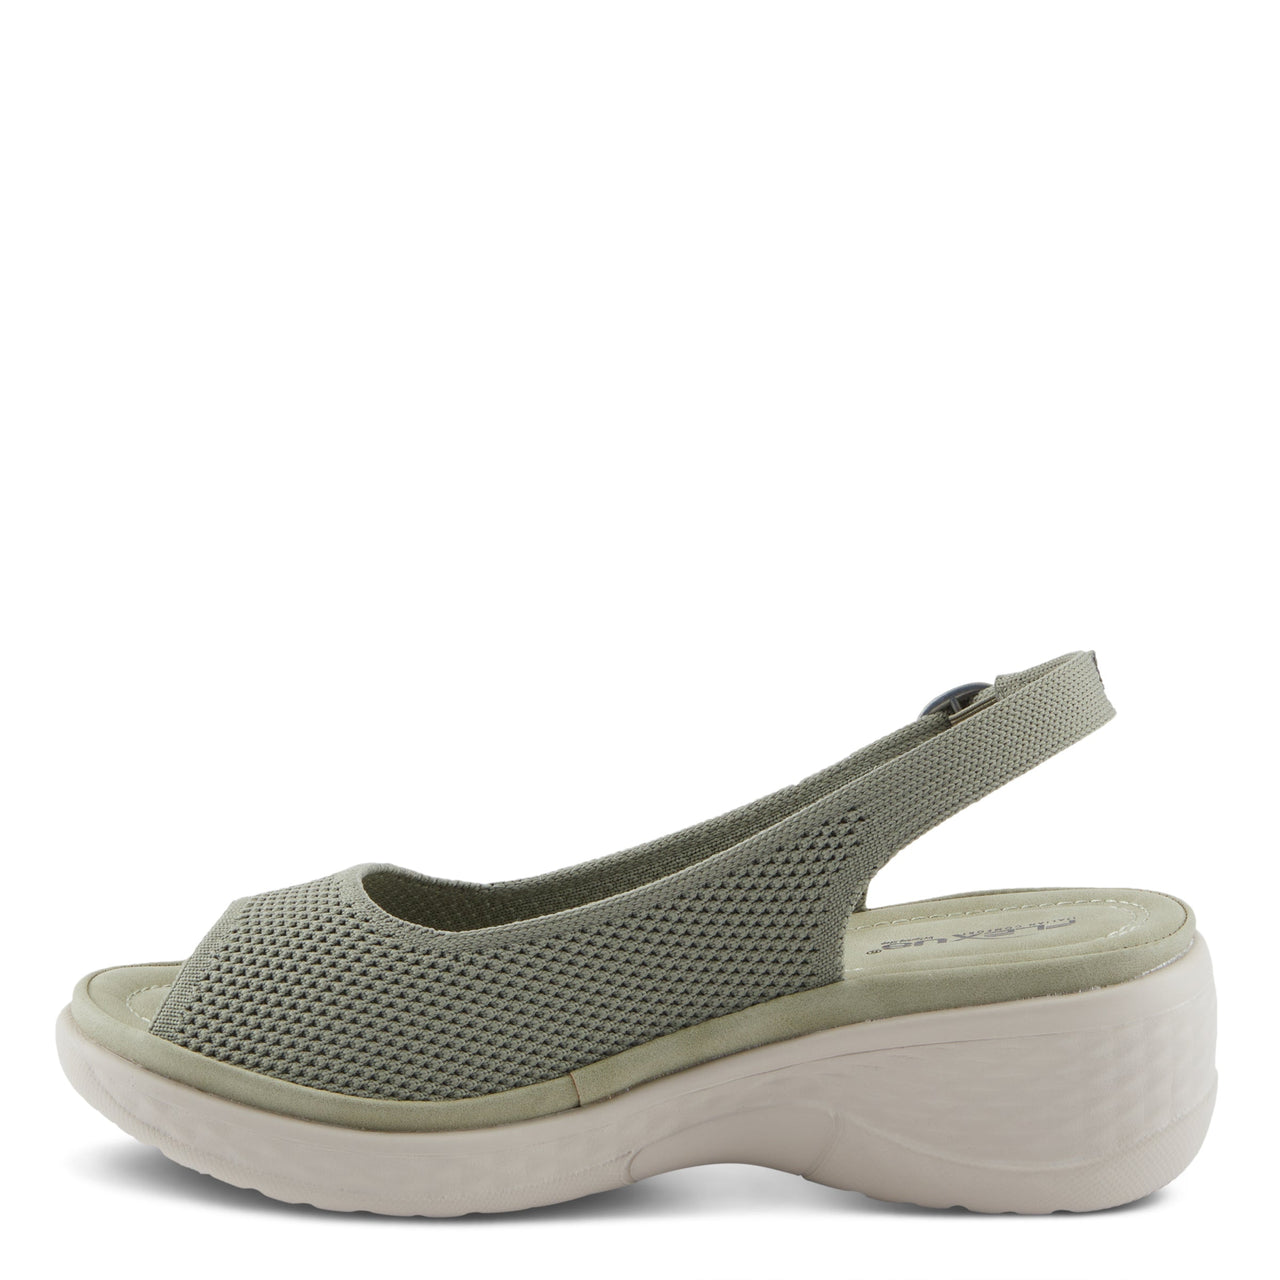 Spring Step Shoes Flexus Mayberry Sandals